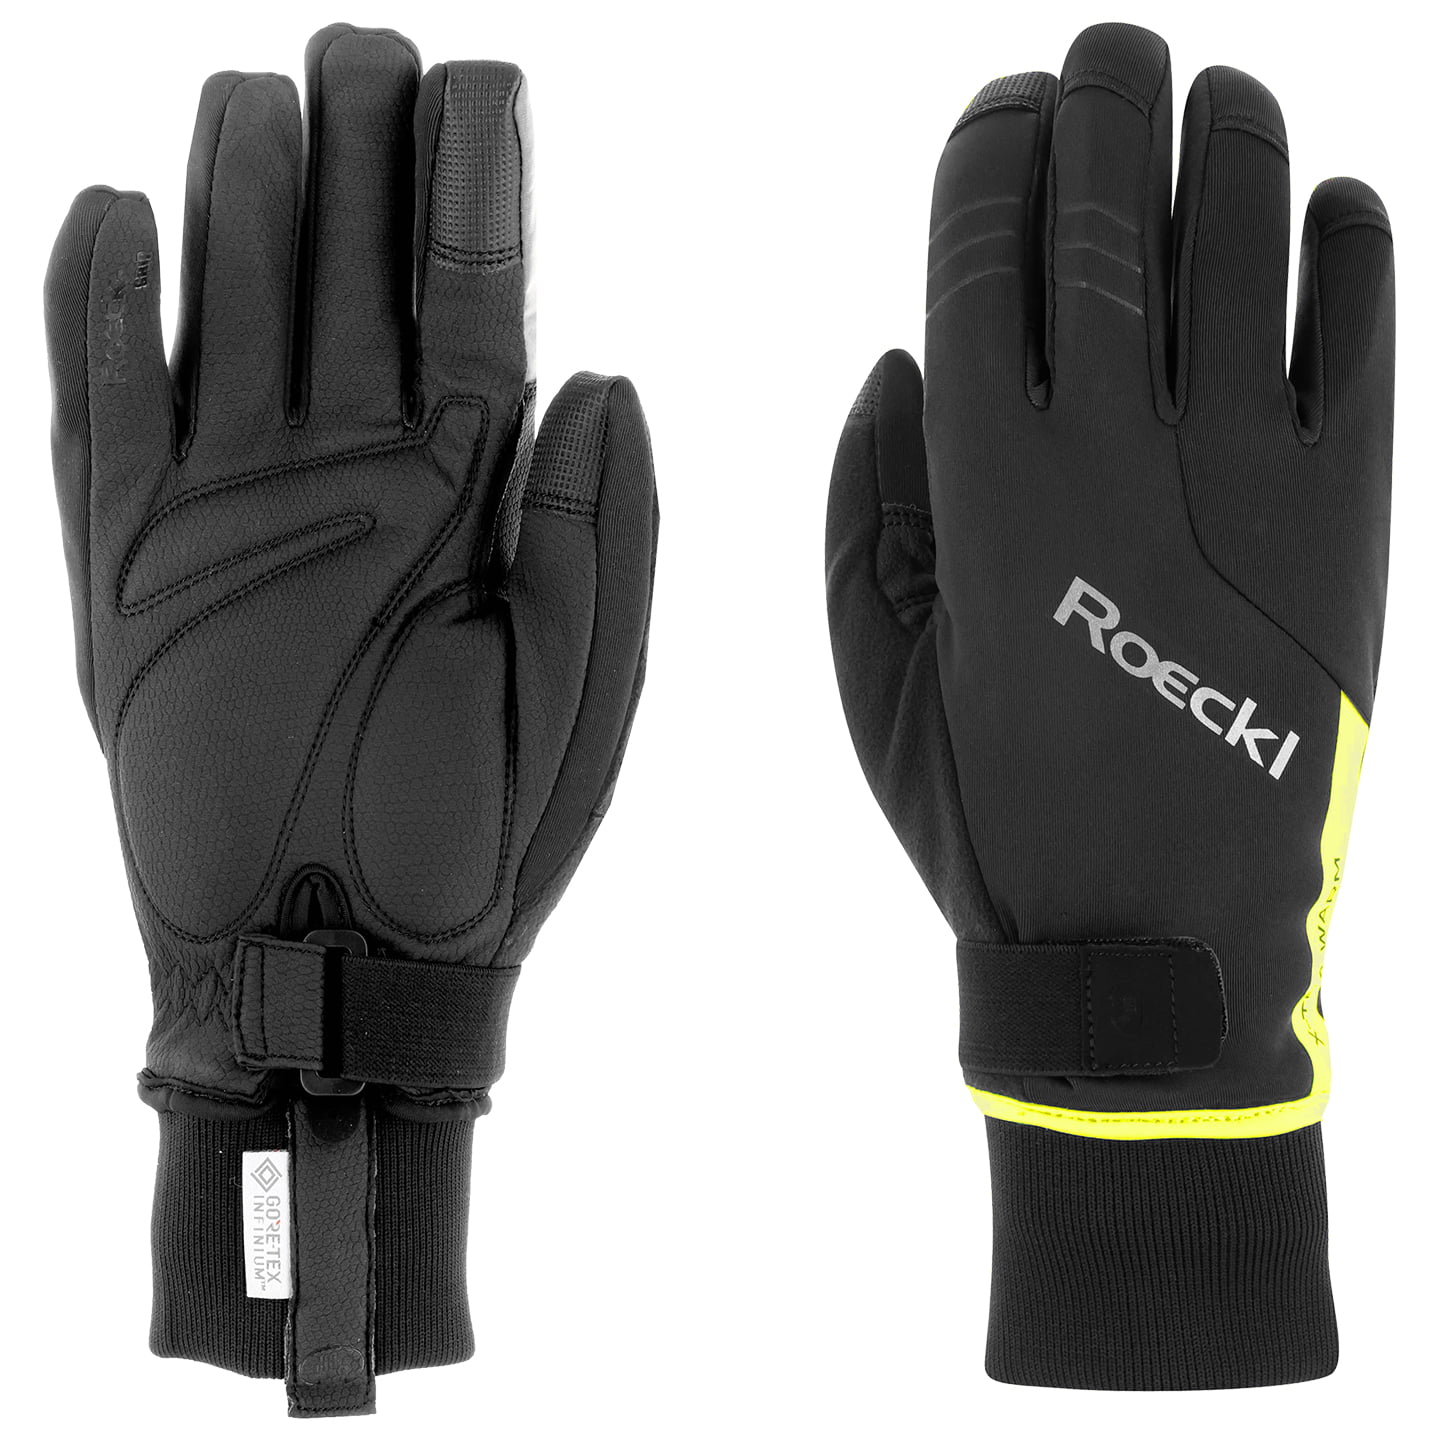 ROECKL Villach 2 Winter Gloves Winter Cycling Gloves, for men, size 11, Cycle gloves, MTB gear